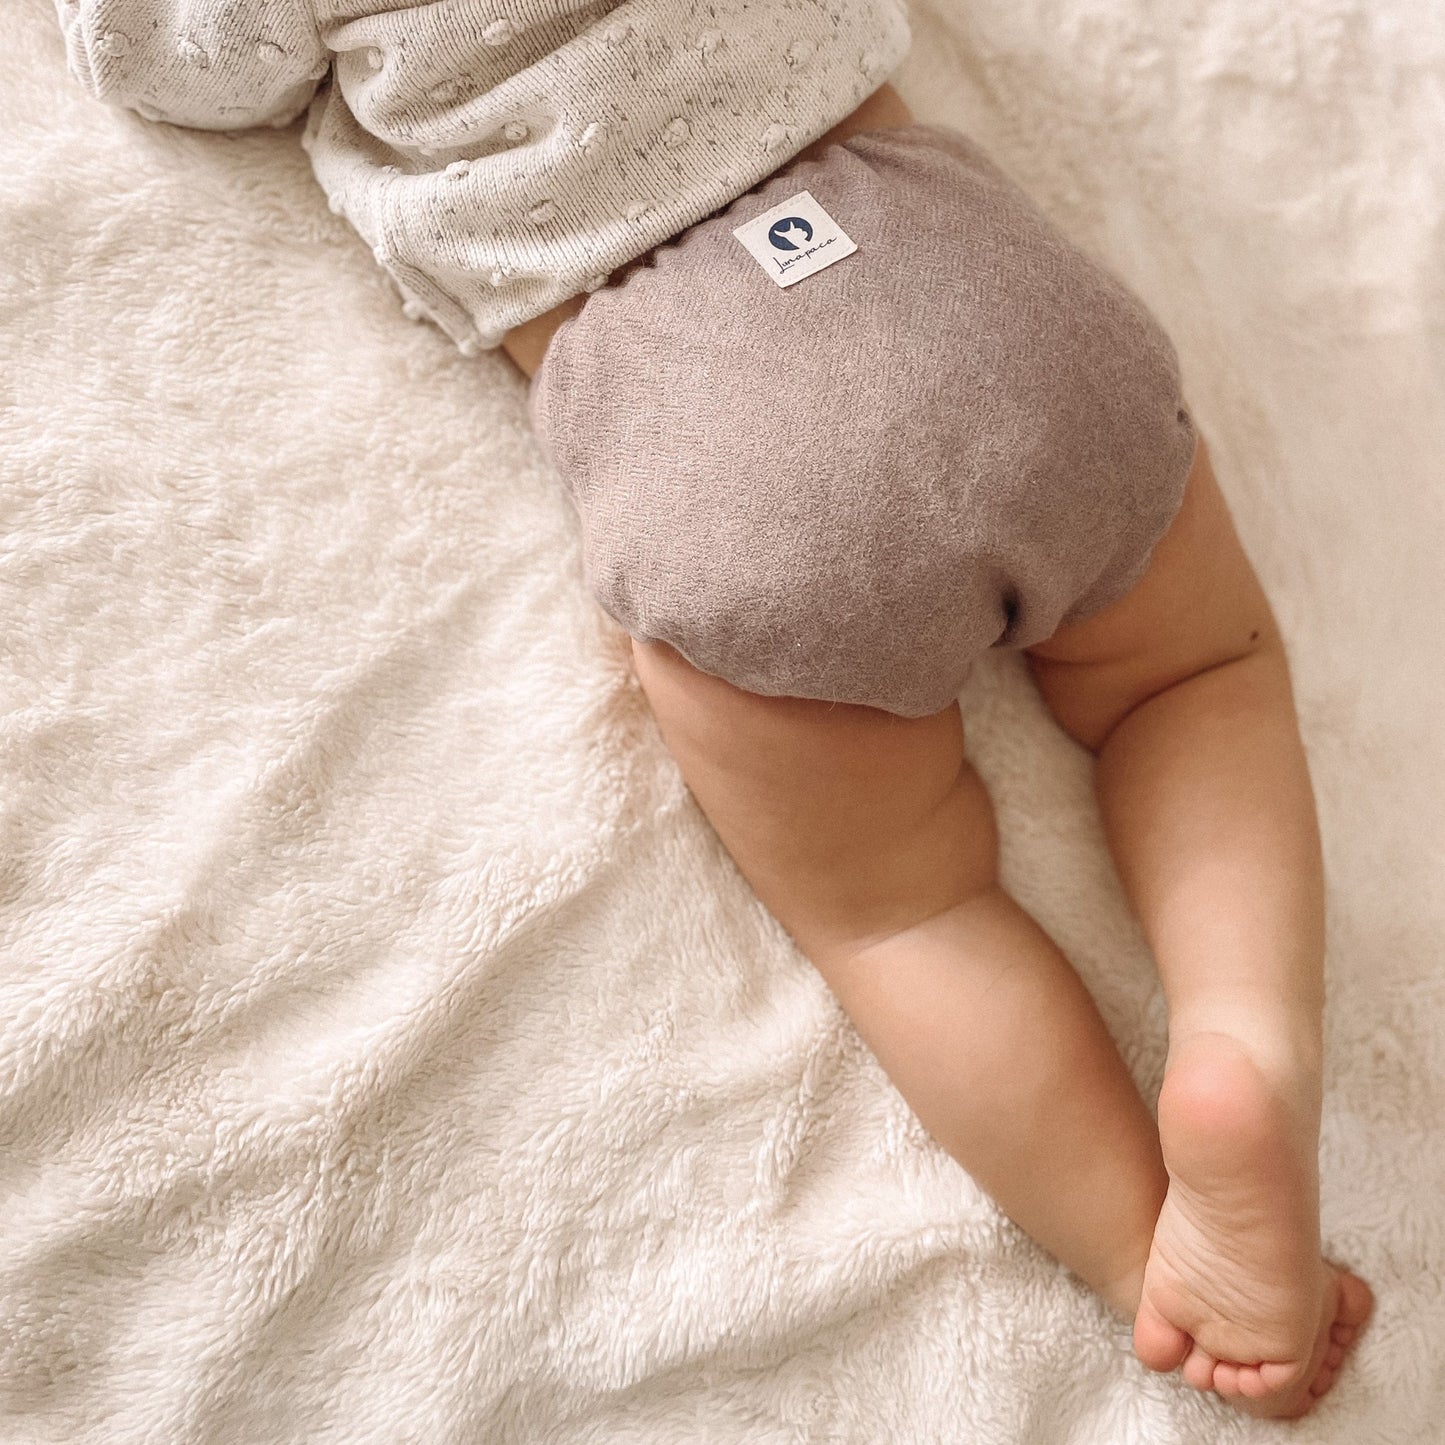 A toddler laying on her stomach on a white blanket wearing a cream colored sweater and a clay colored alpaca diaper cover with a white square logo on the center upper back of the diaper cover.